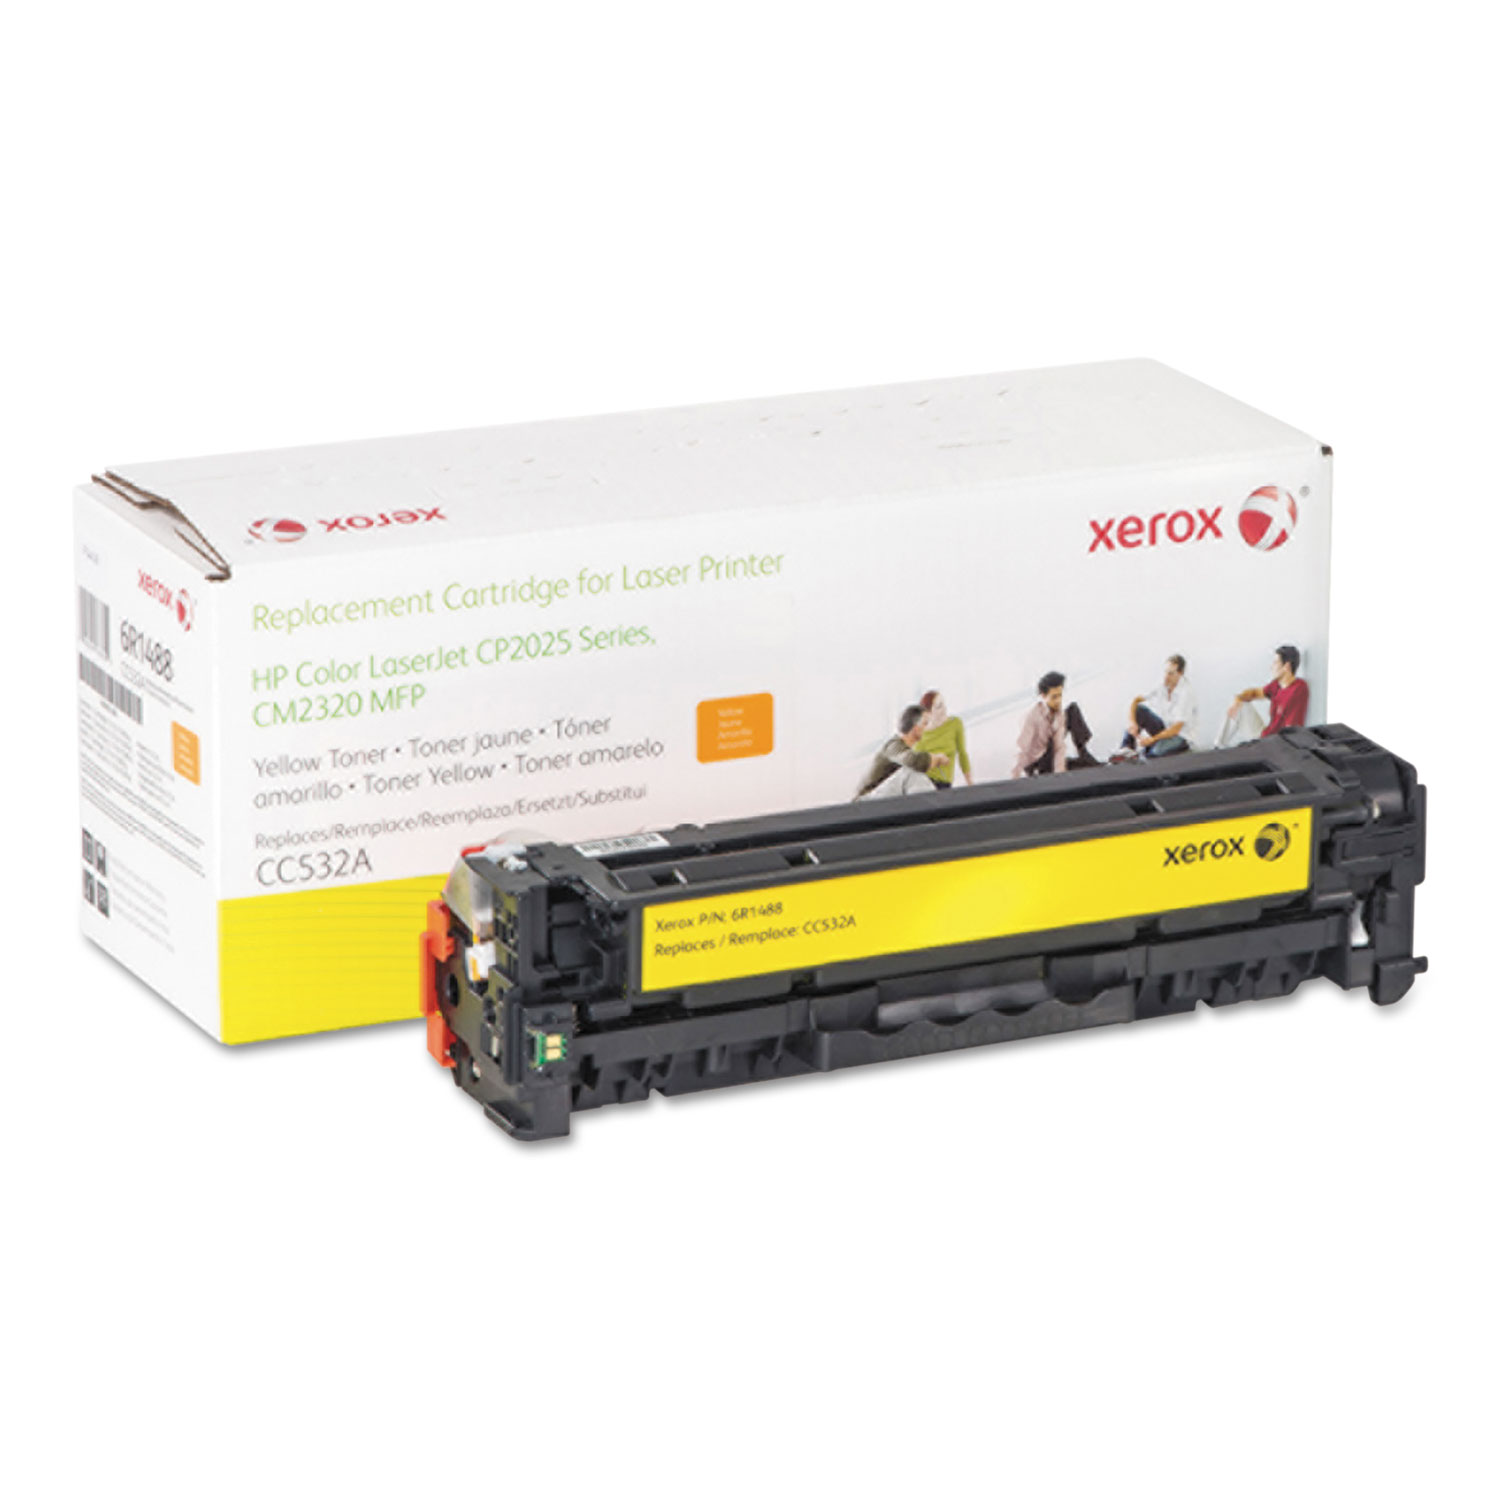  Xerox 006R01488 006R01488 Replacement Toner for CC532A (304A), 2800 Page Yield, Yellow (XER006R01488) 